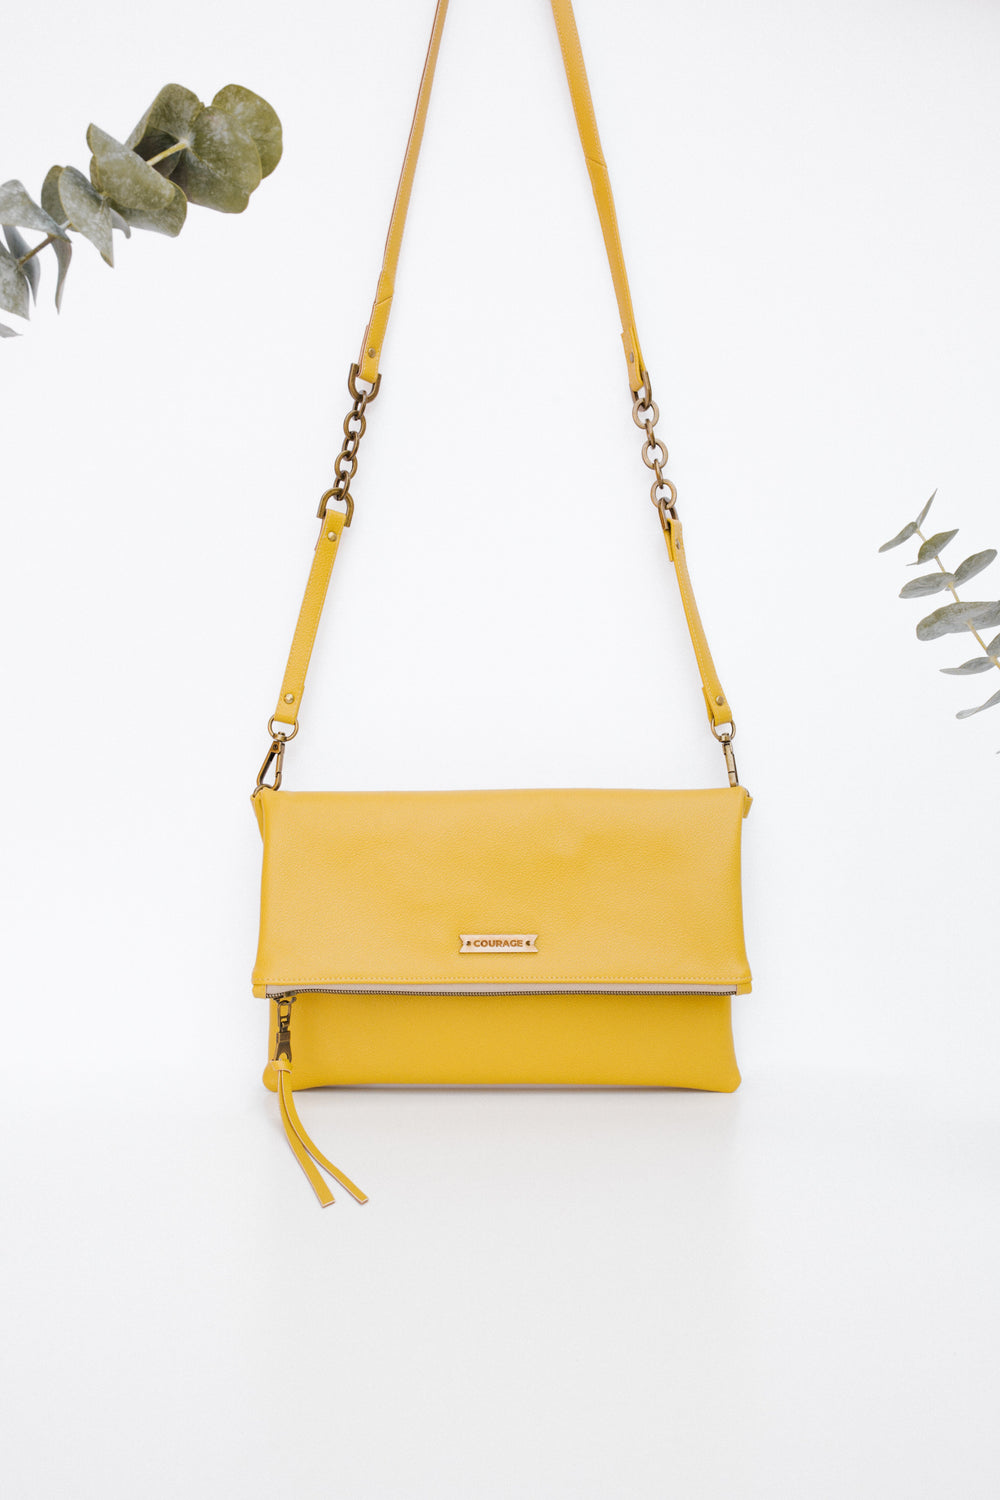 DREAMER foldover bag | MUSTARD by Carry Courage